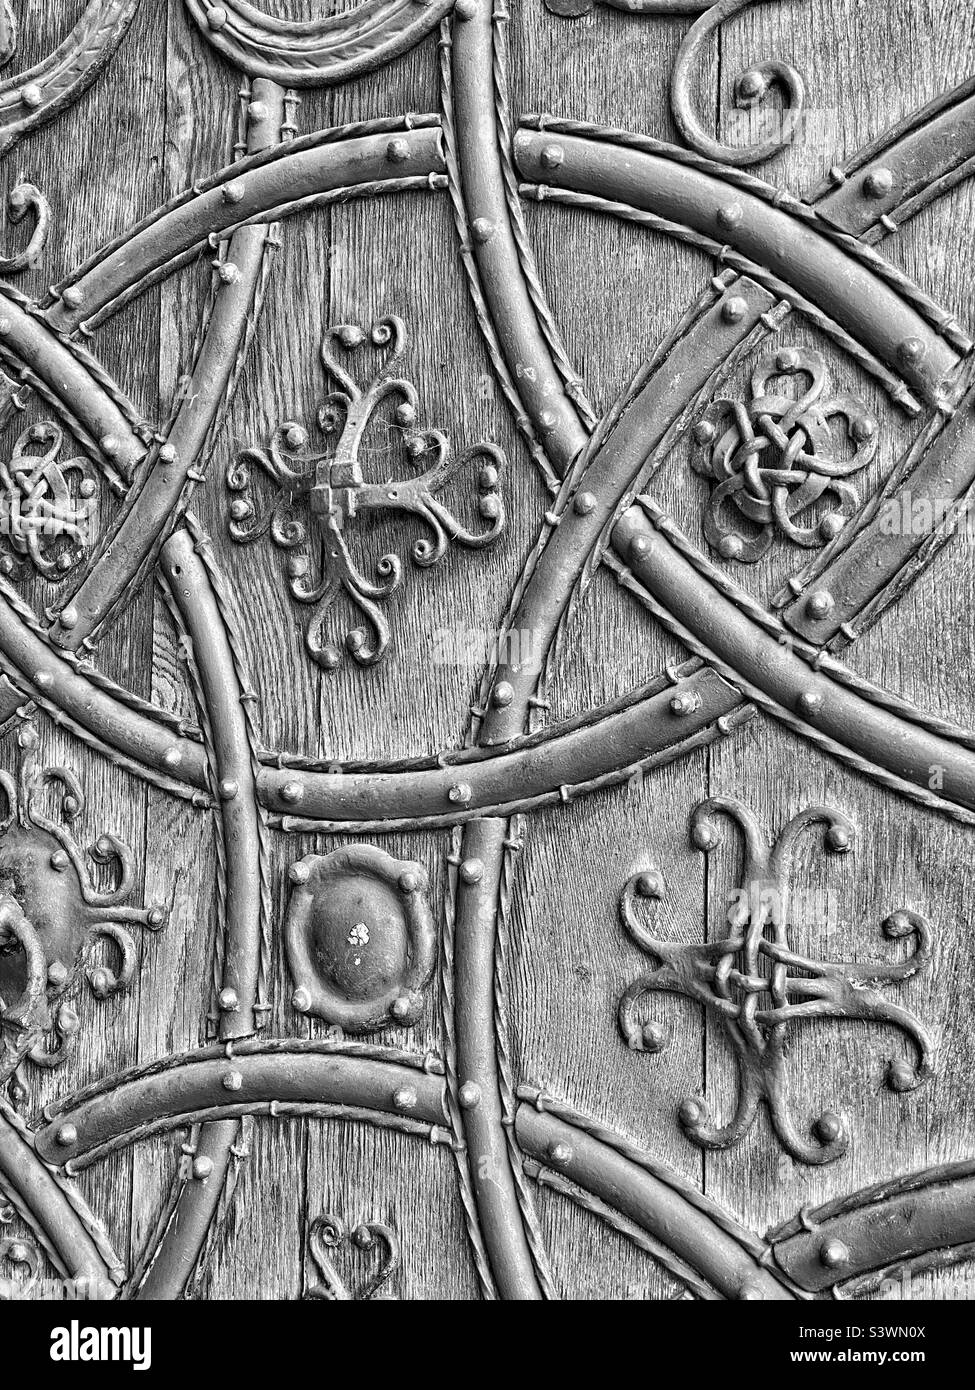 A monochrome image showing the exquisite ironwork design and detail on the Great West Door of Rochester Cathedral in Kent, England. This cathedral is a Grade 1 listed building. Photo ©️ COLIN HOSKINS. Stock Photo